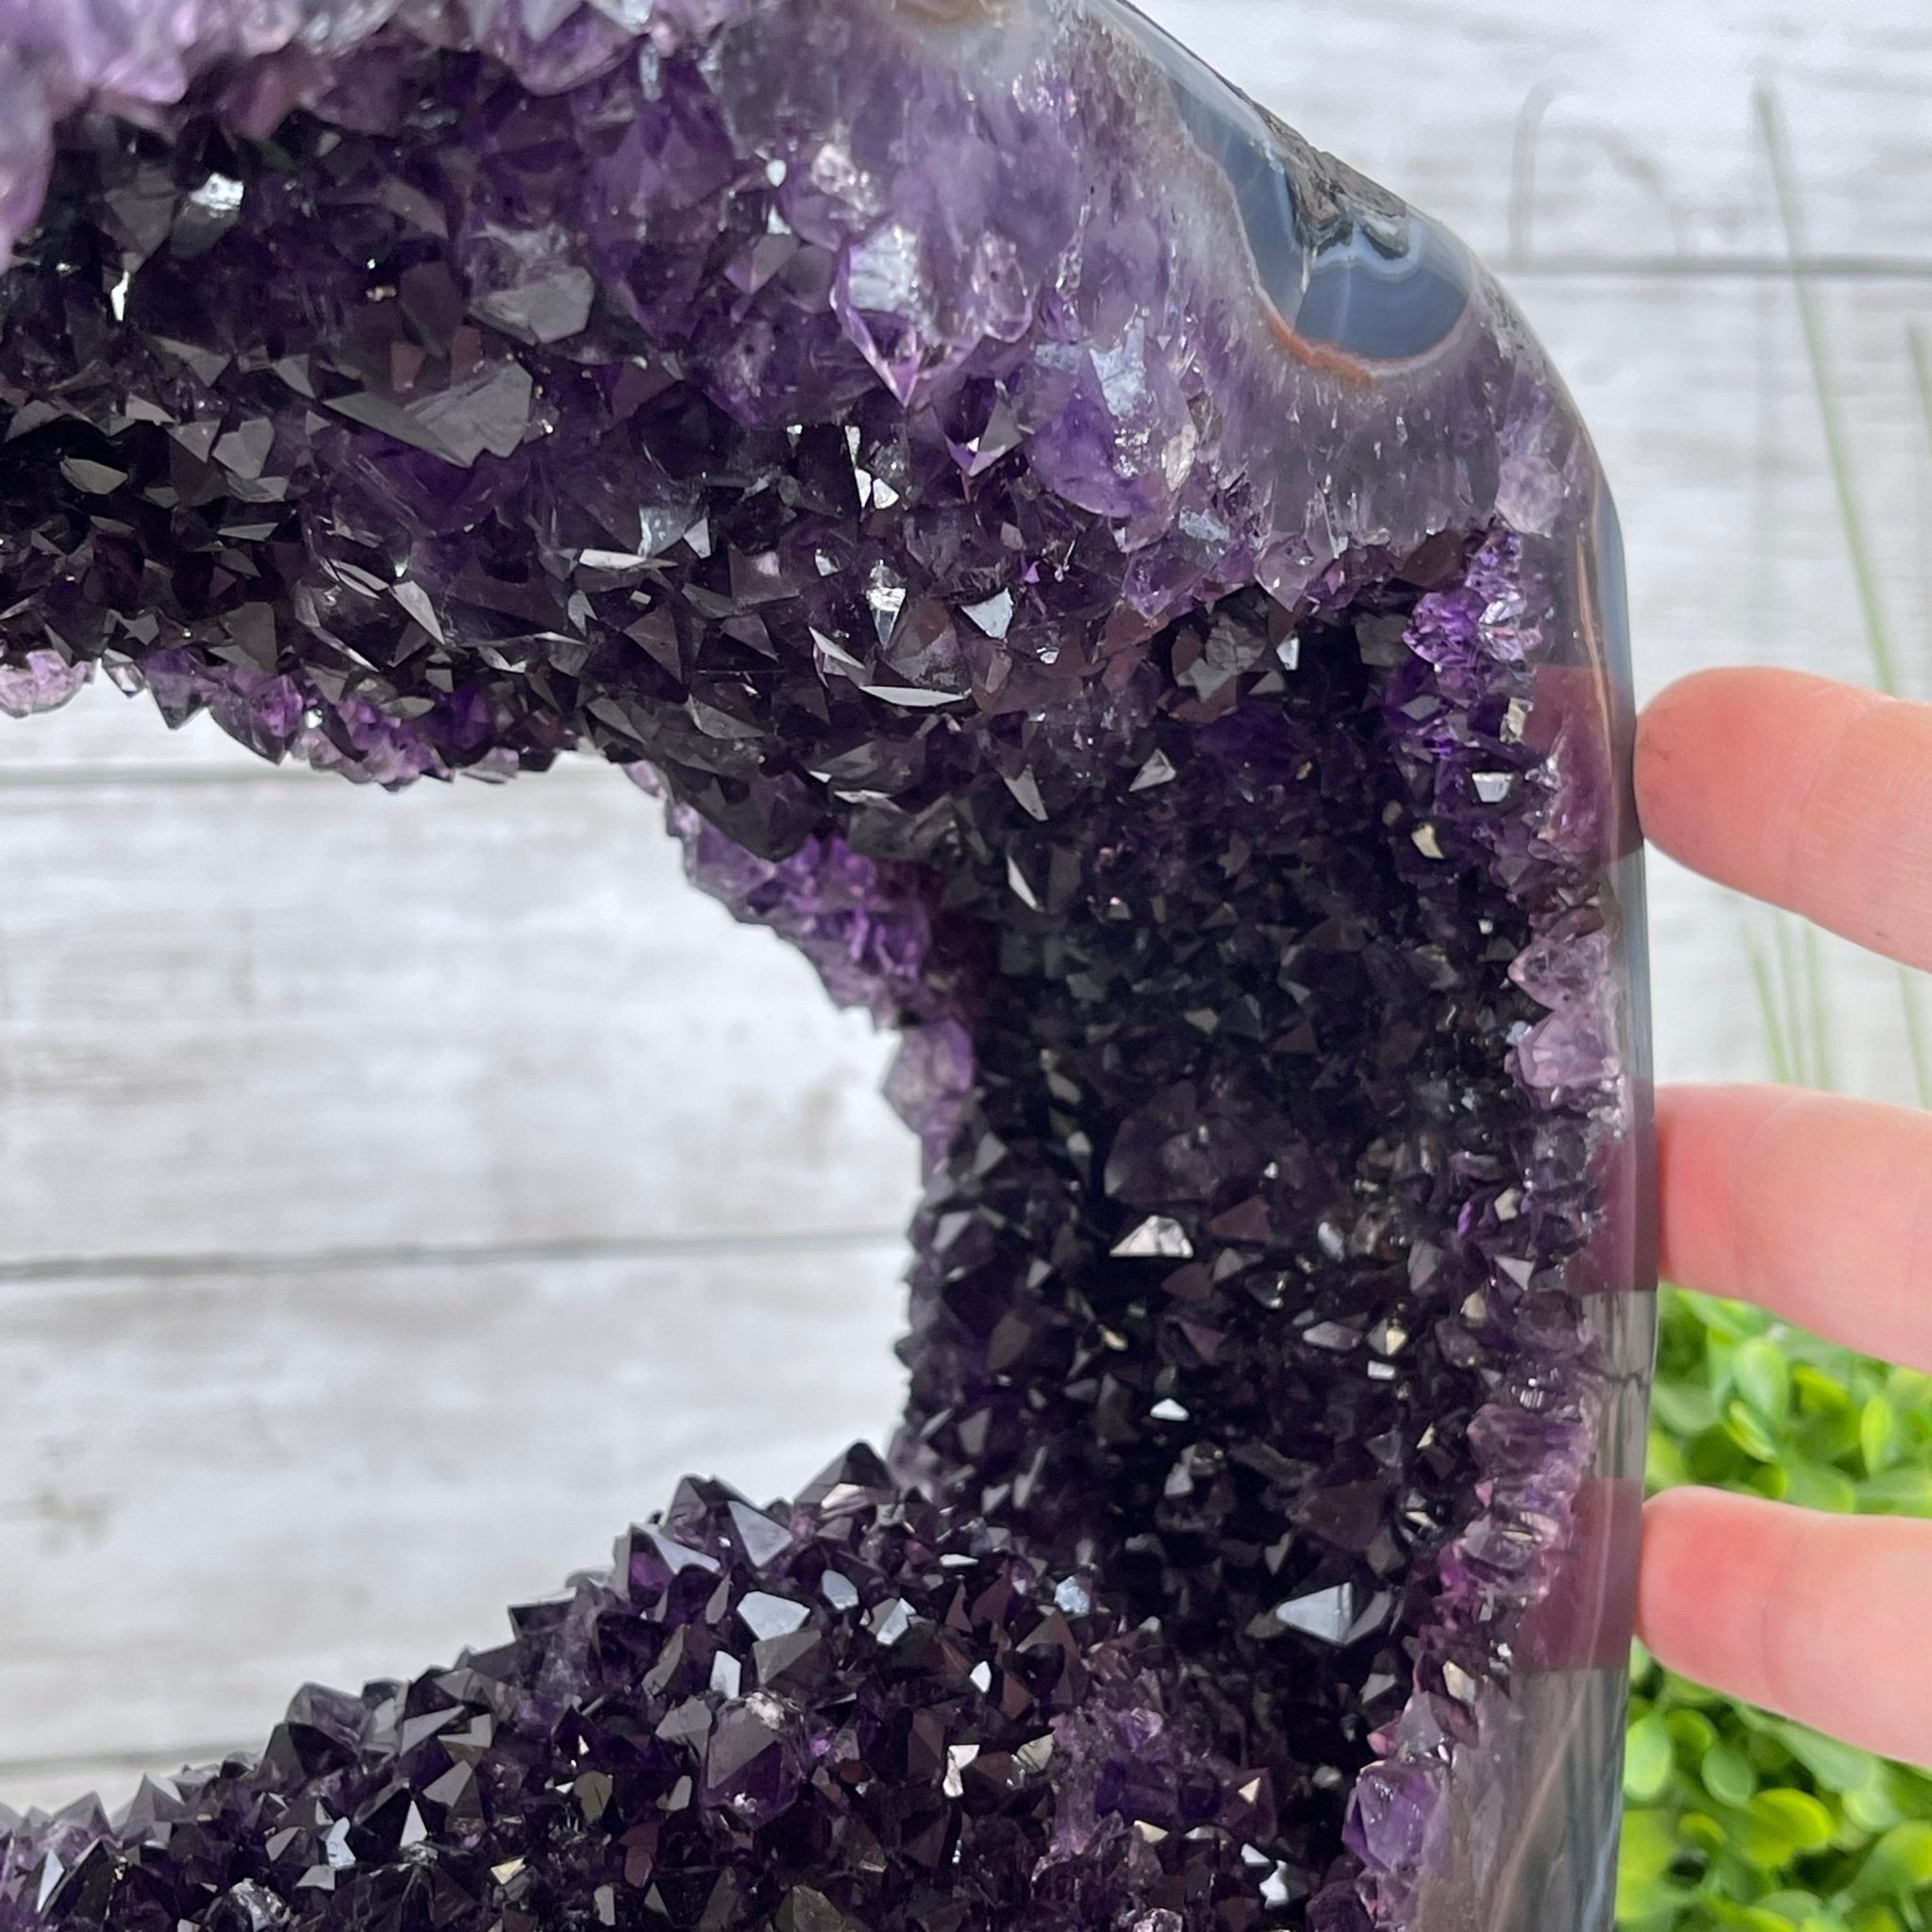 Super Quality Open 2-Sided Brazilian Amethyst Cathedral, 21.9 lbs, 11" tall, #5605-0088 by Brazil Gems - Brazil GemsBrazil GemsSuper Quality Open 2-Sided Brazilian Amethyst Cathedral, 21.9 lbs, 11" tall, #5605-0088 by Brazil GemsOpen 2-Sided Cathedrals5605-0088